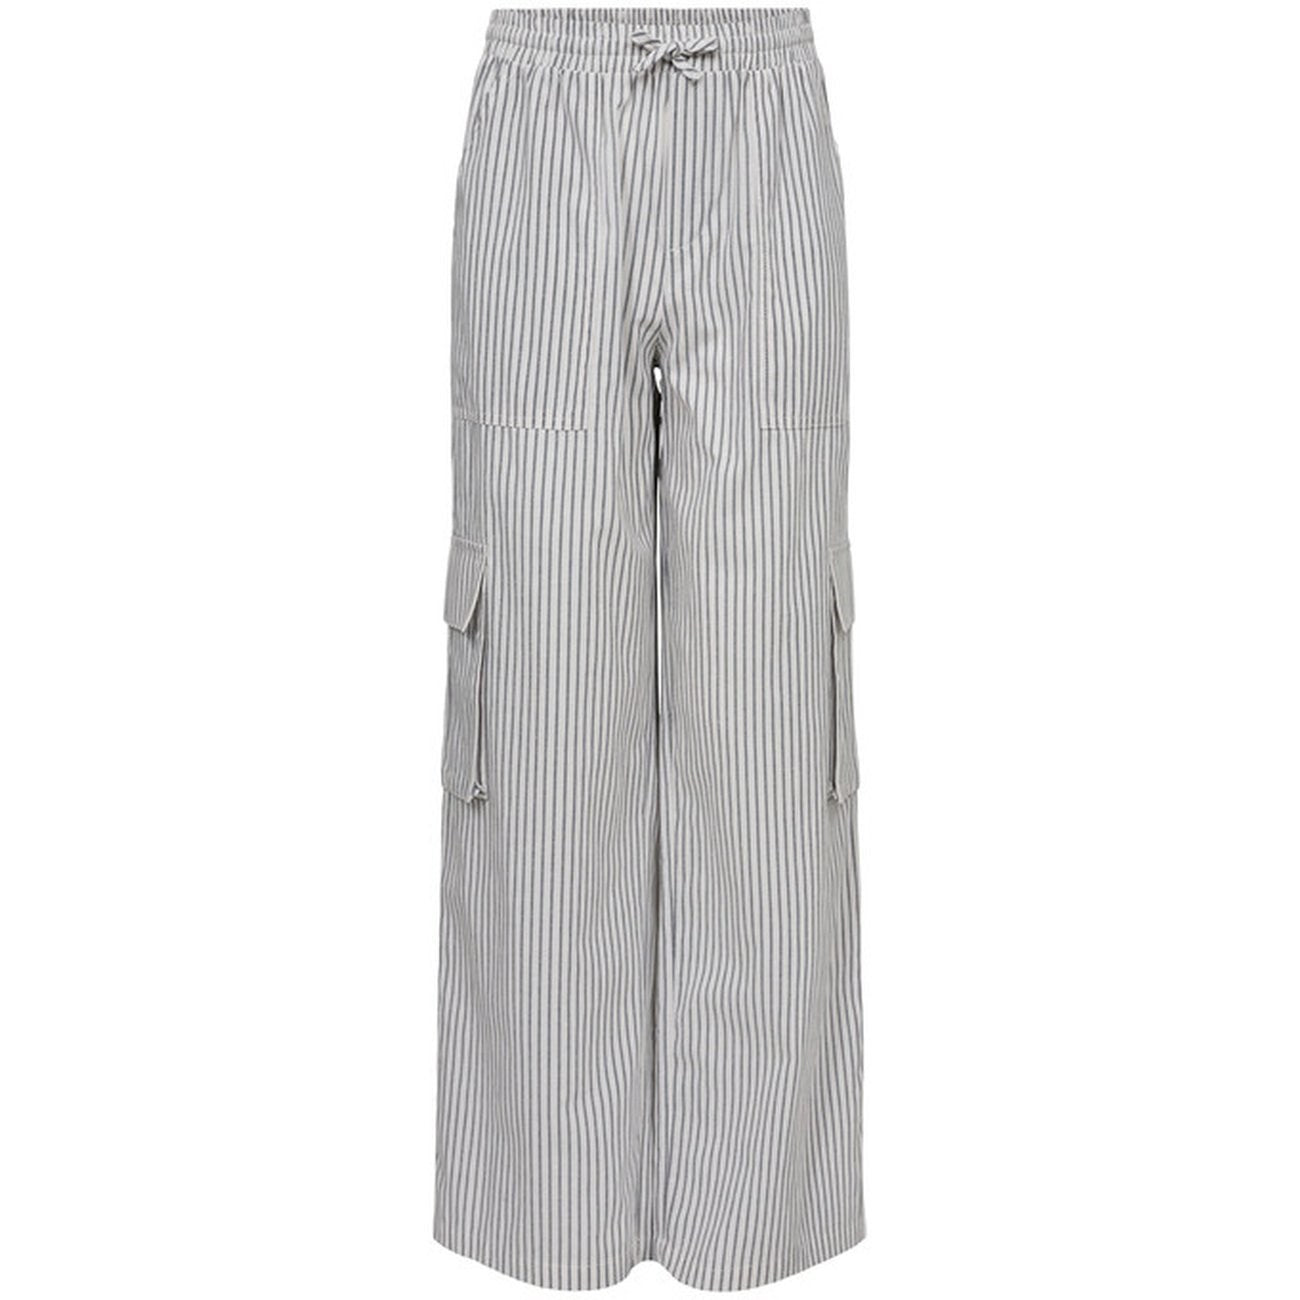 Sofie Schnoor Blue Striped Trousers